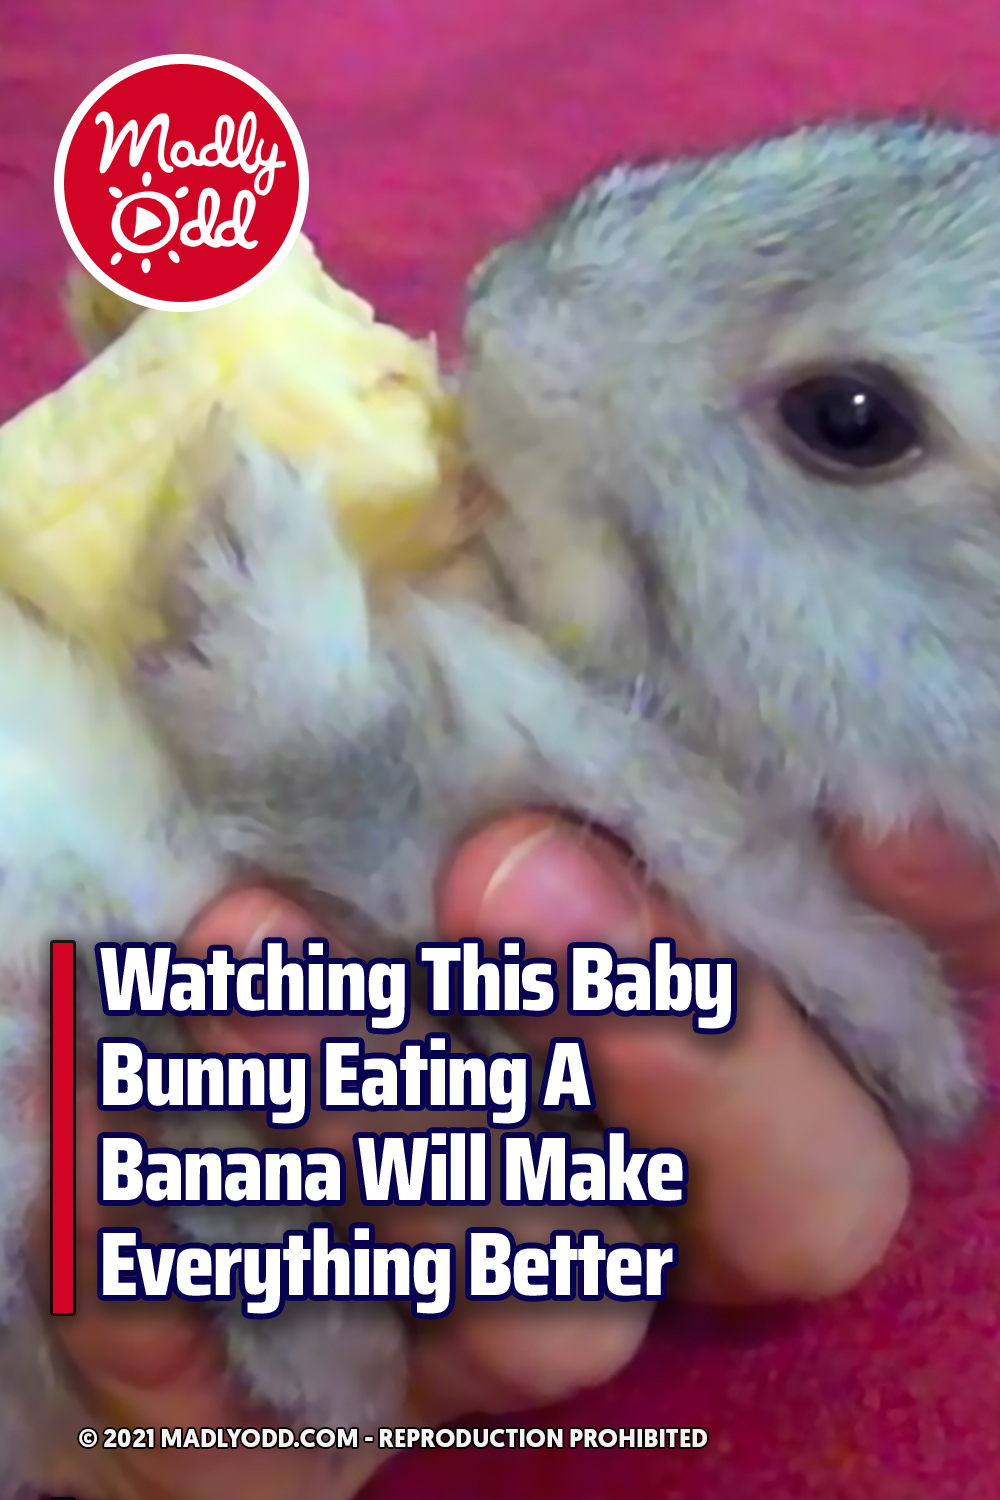 Watching This Baby Bunny Eating A Banana Will Make Everything Better